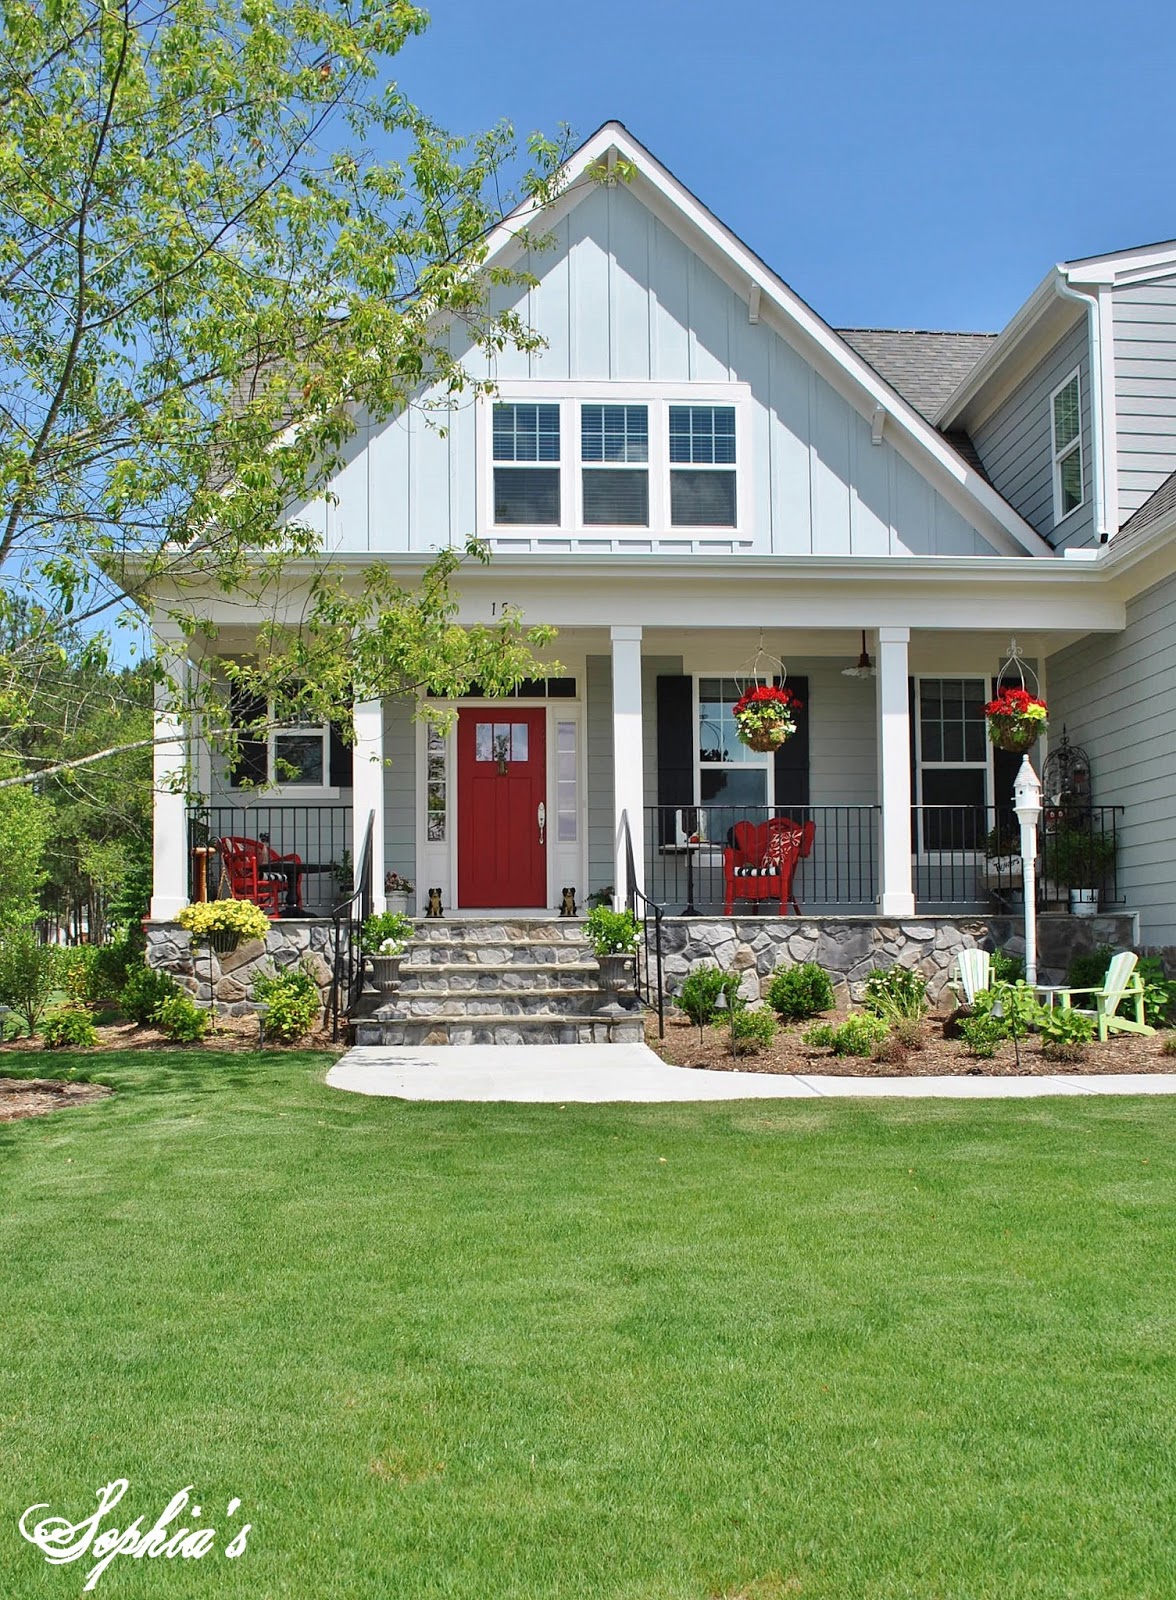 Sophia's: Farmhouse Style Front Porch with Pops of Red